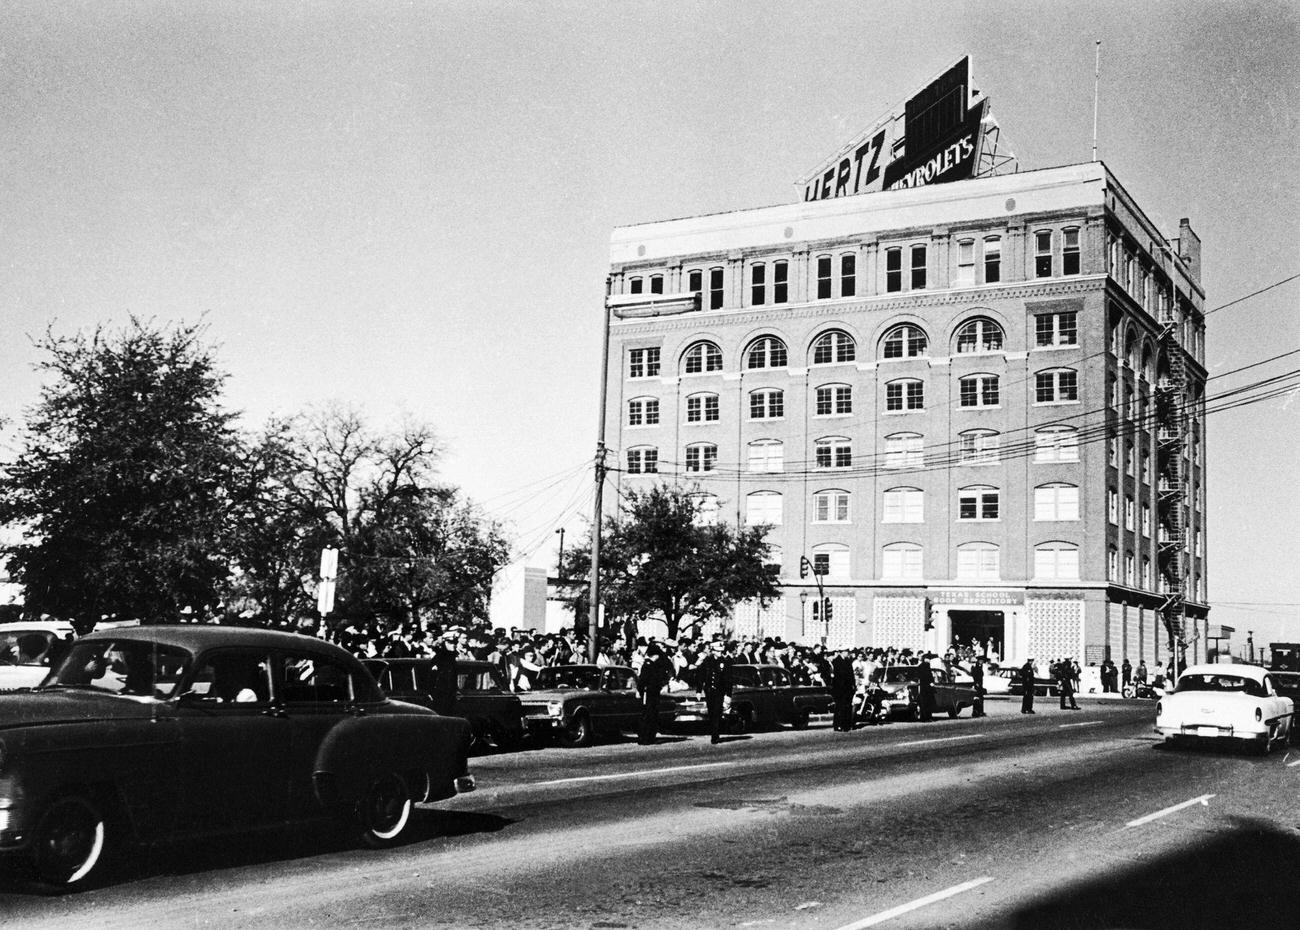 A crowd awaits President Kennedy's motorcade at Dealey Park in Dallas, Texas, just prior to his assassination, 1963.